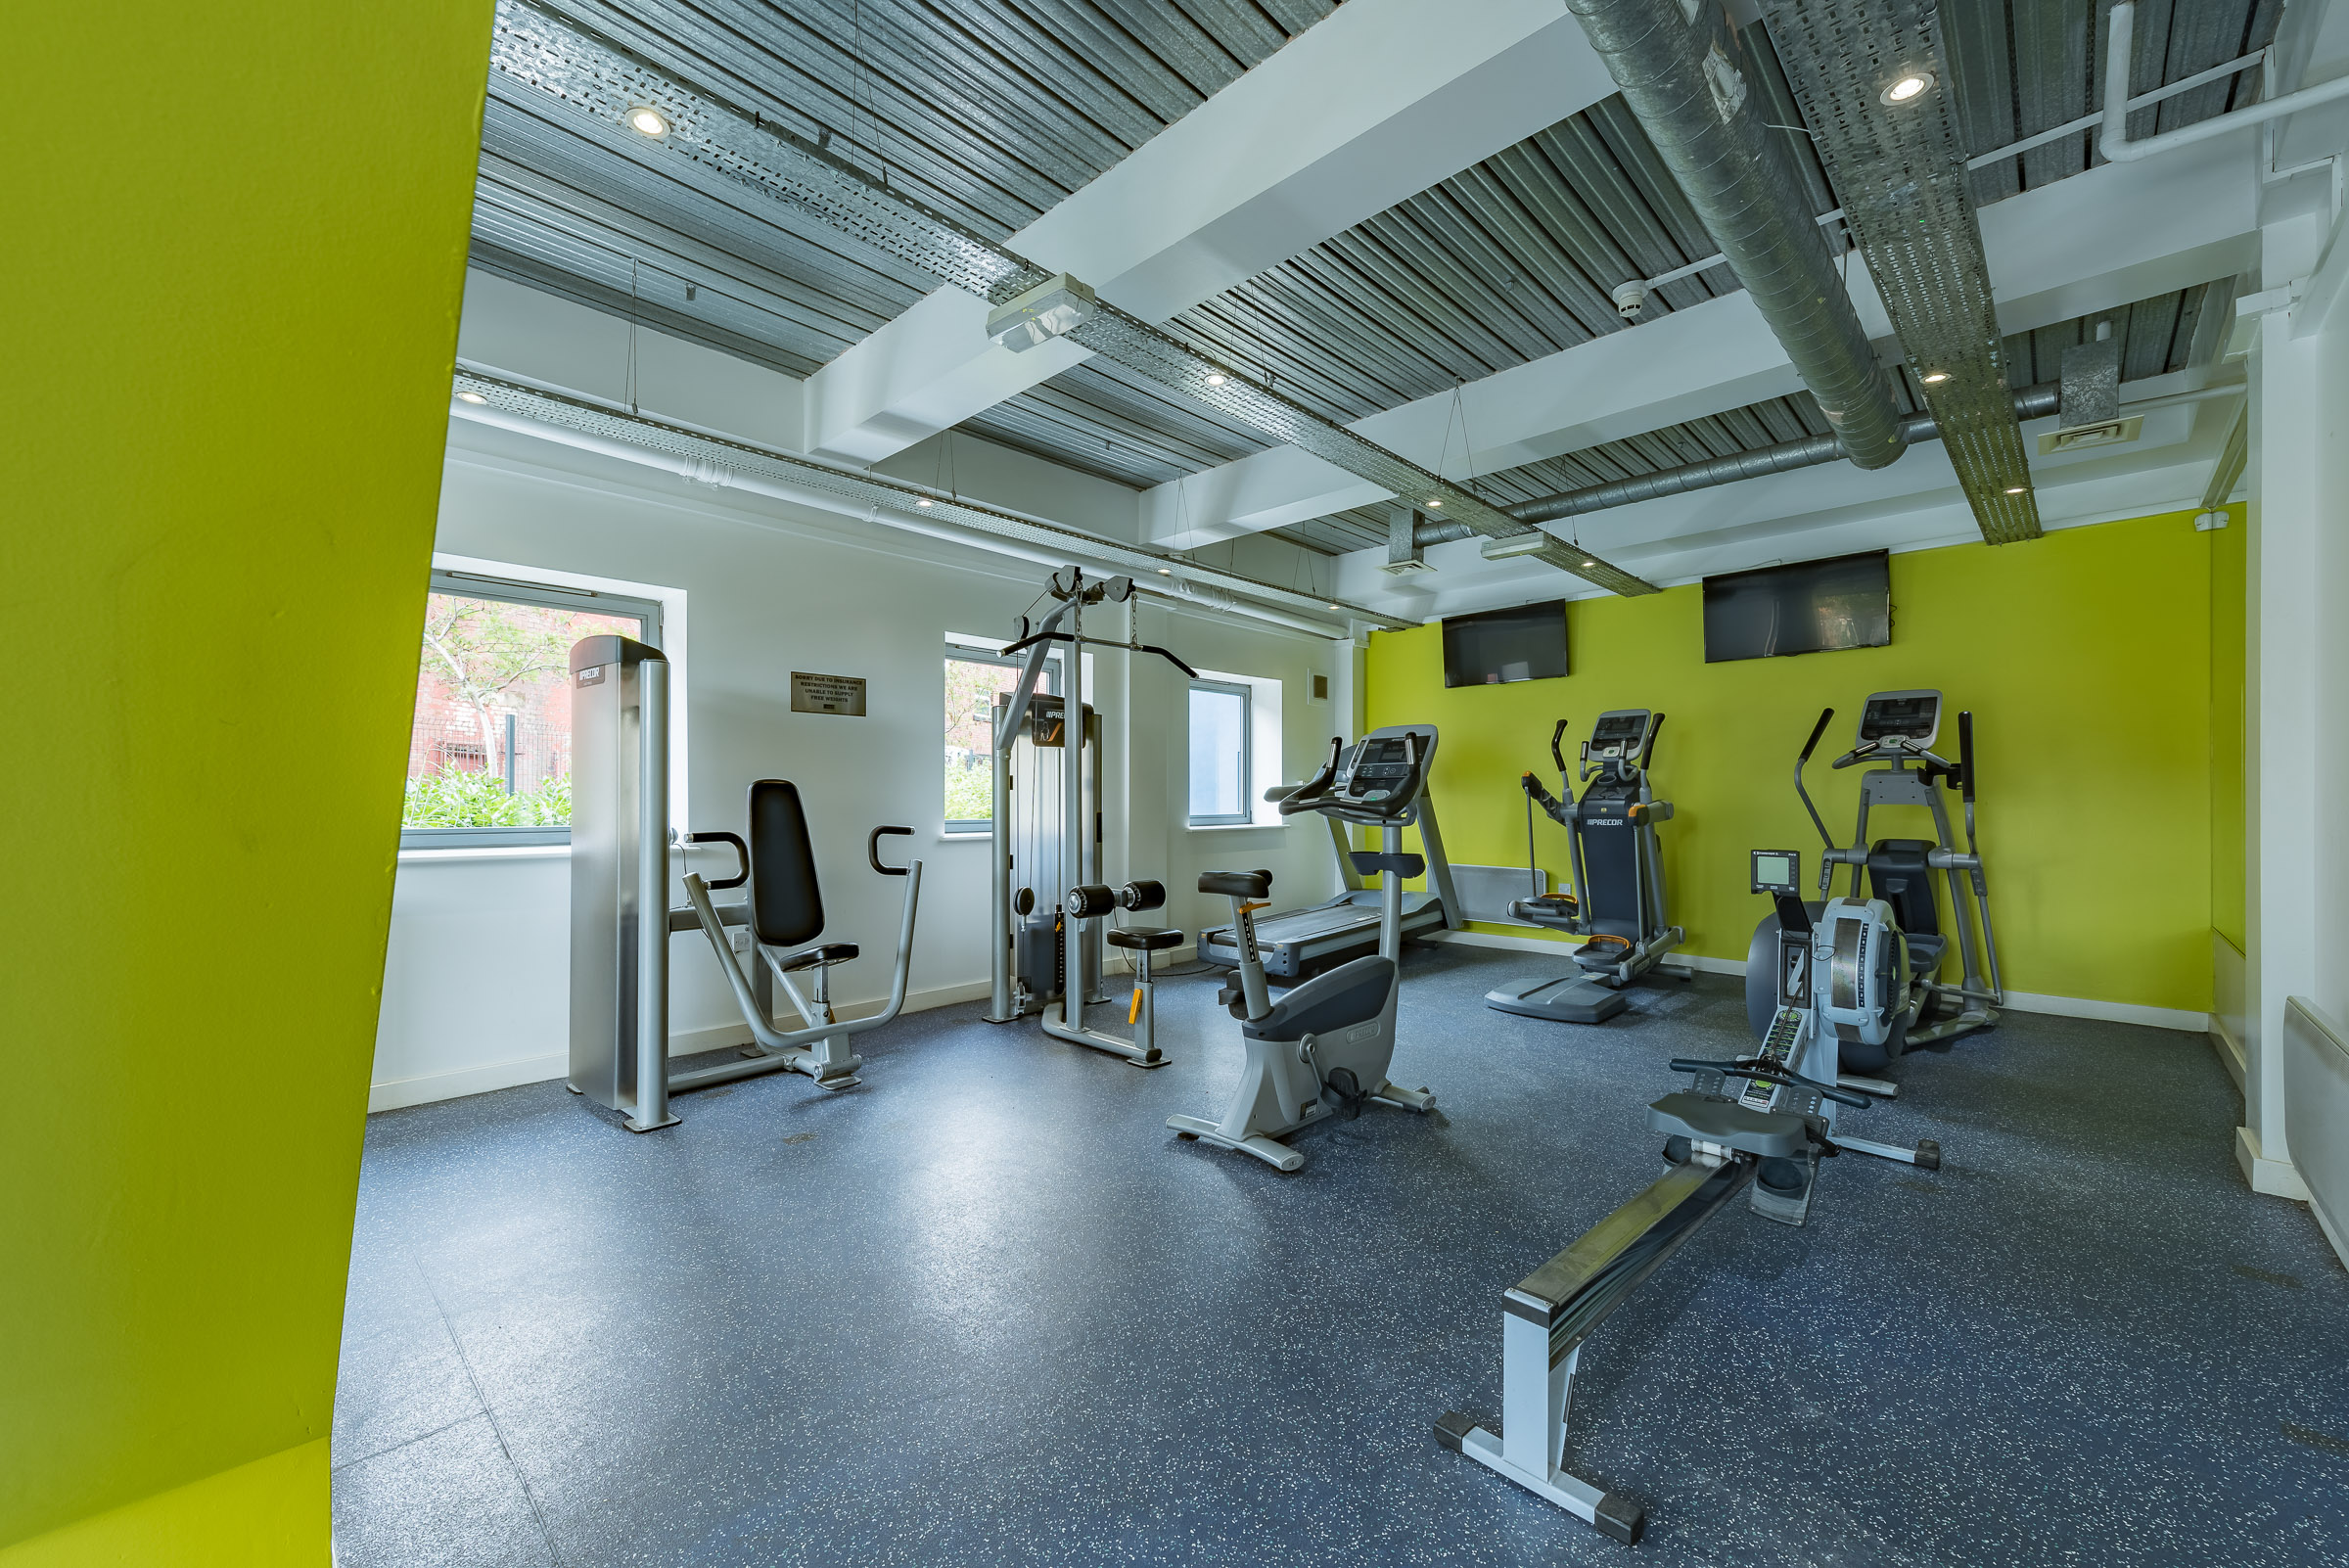 Bright green walls of the gym, with gym apparatus in the background